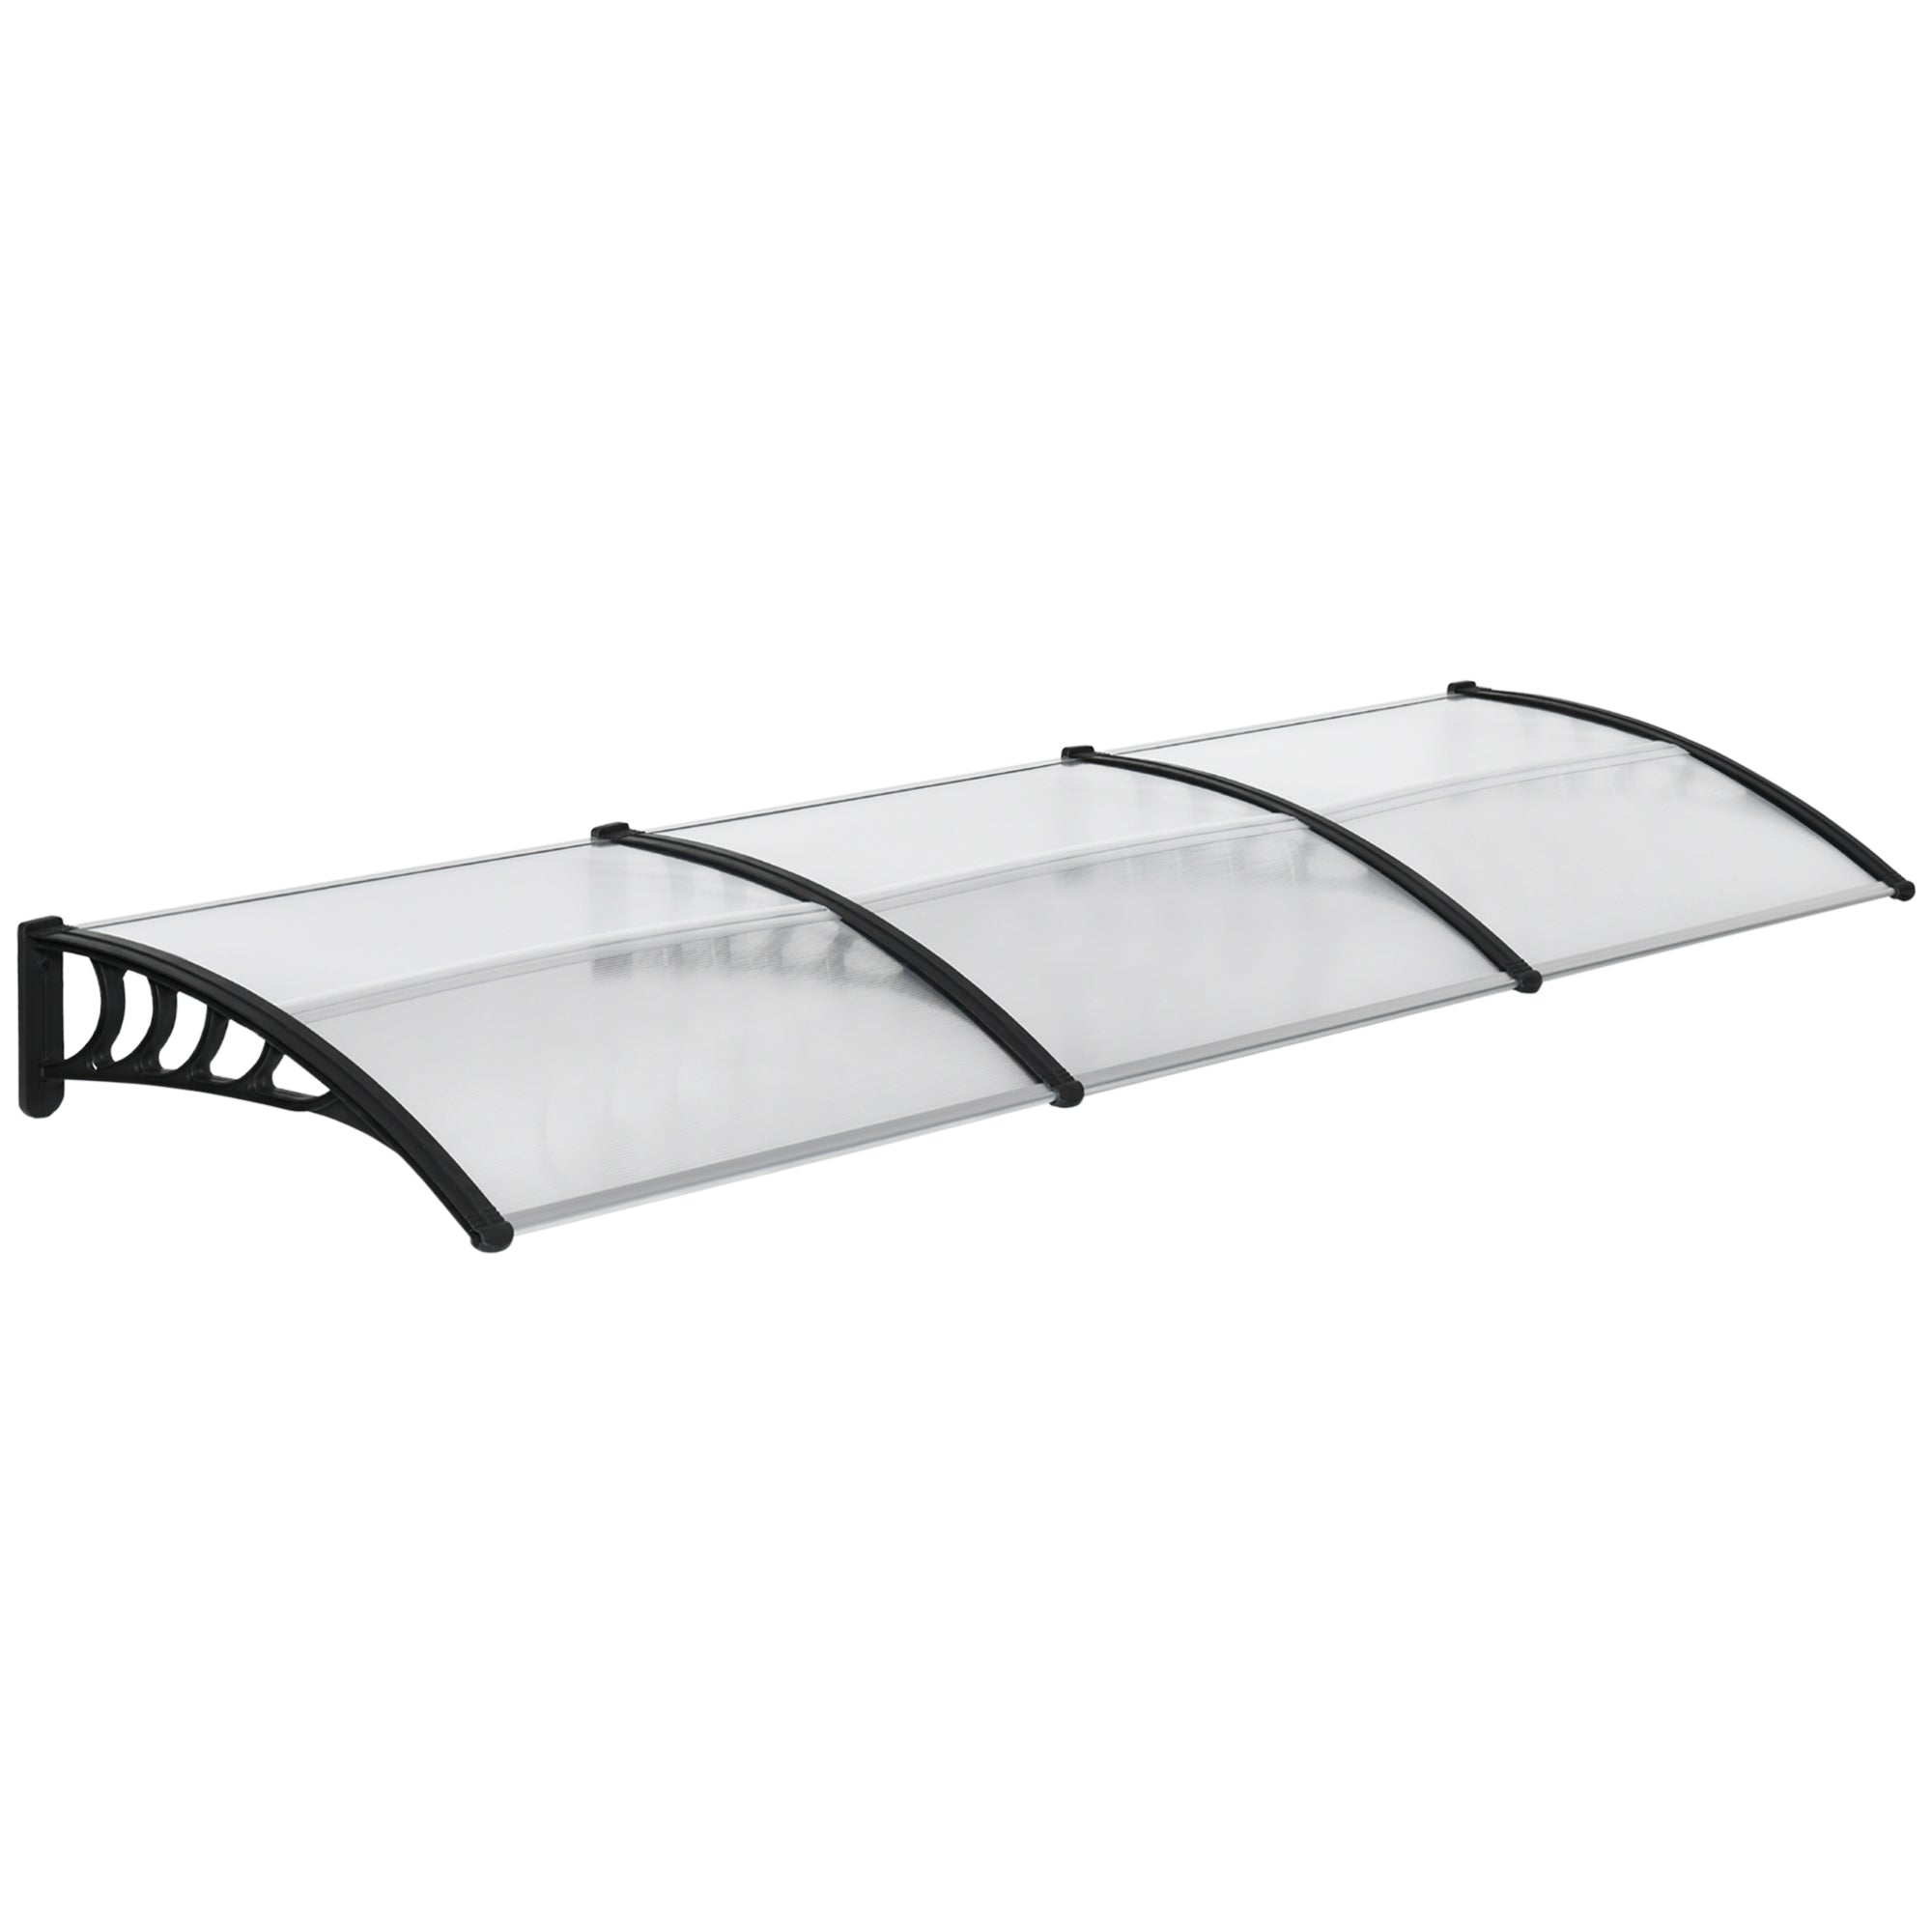 Outsunny Door Canopy Outdoor Awning Rain Shelter for Window Porch 303x96 Clear  | TJ Hughes